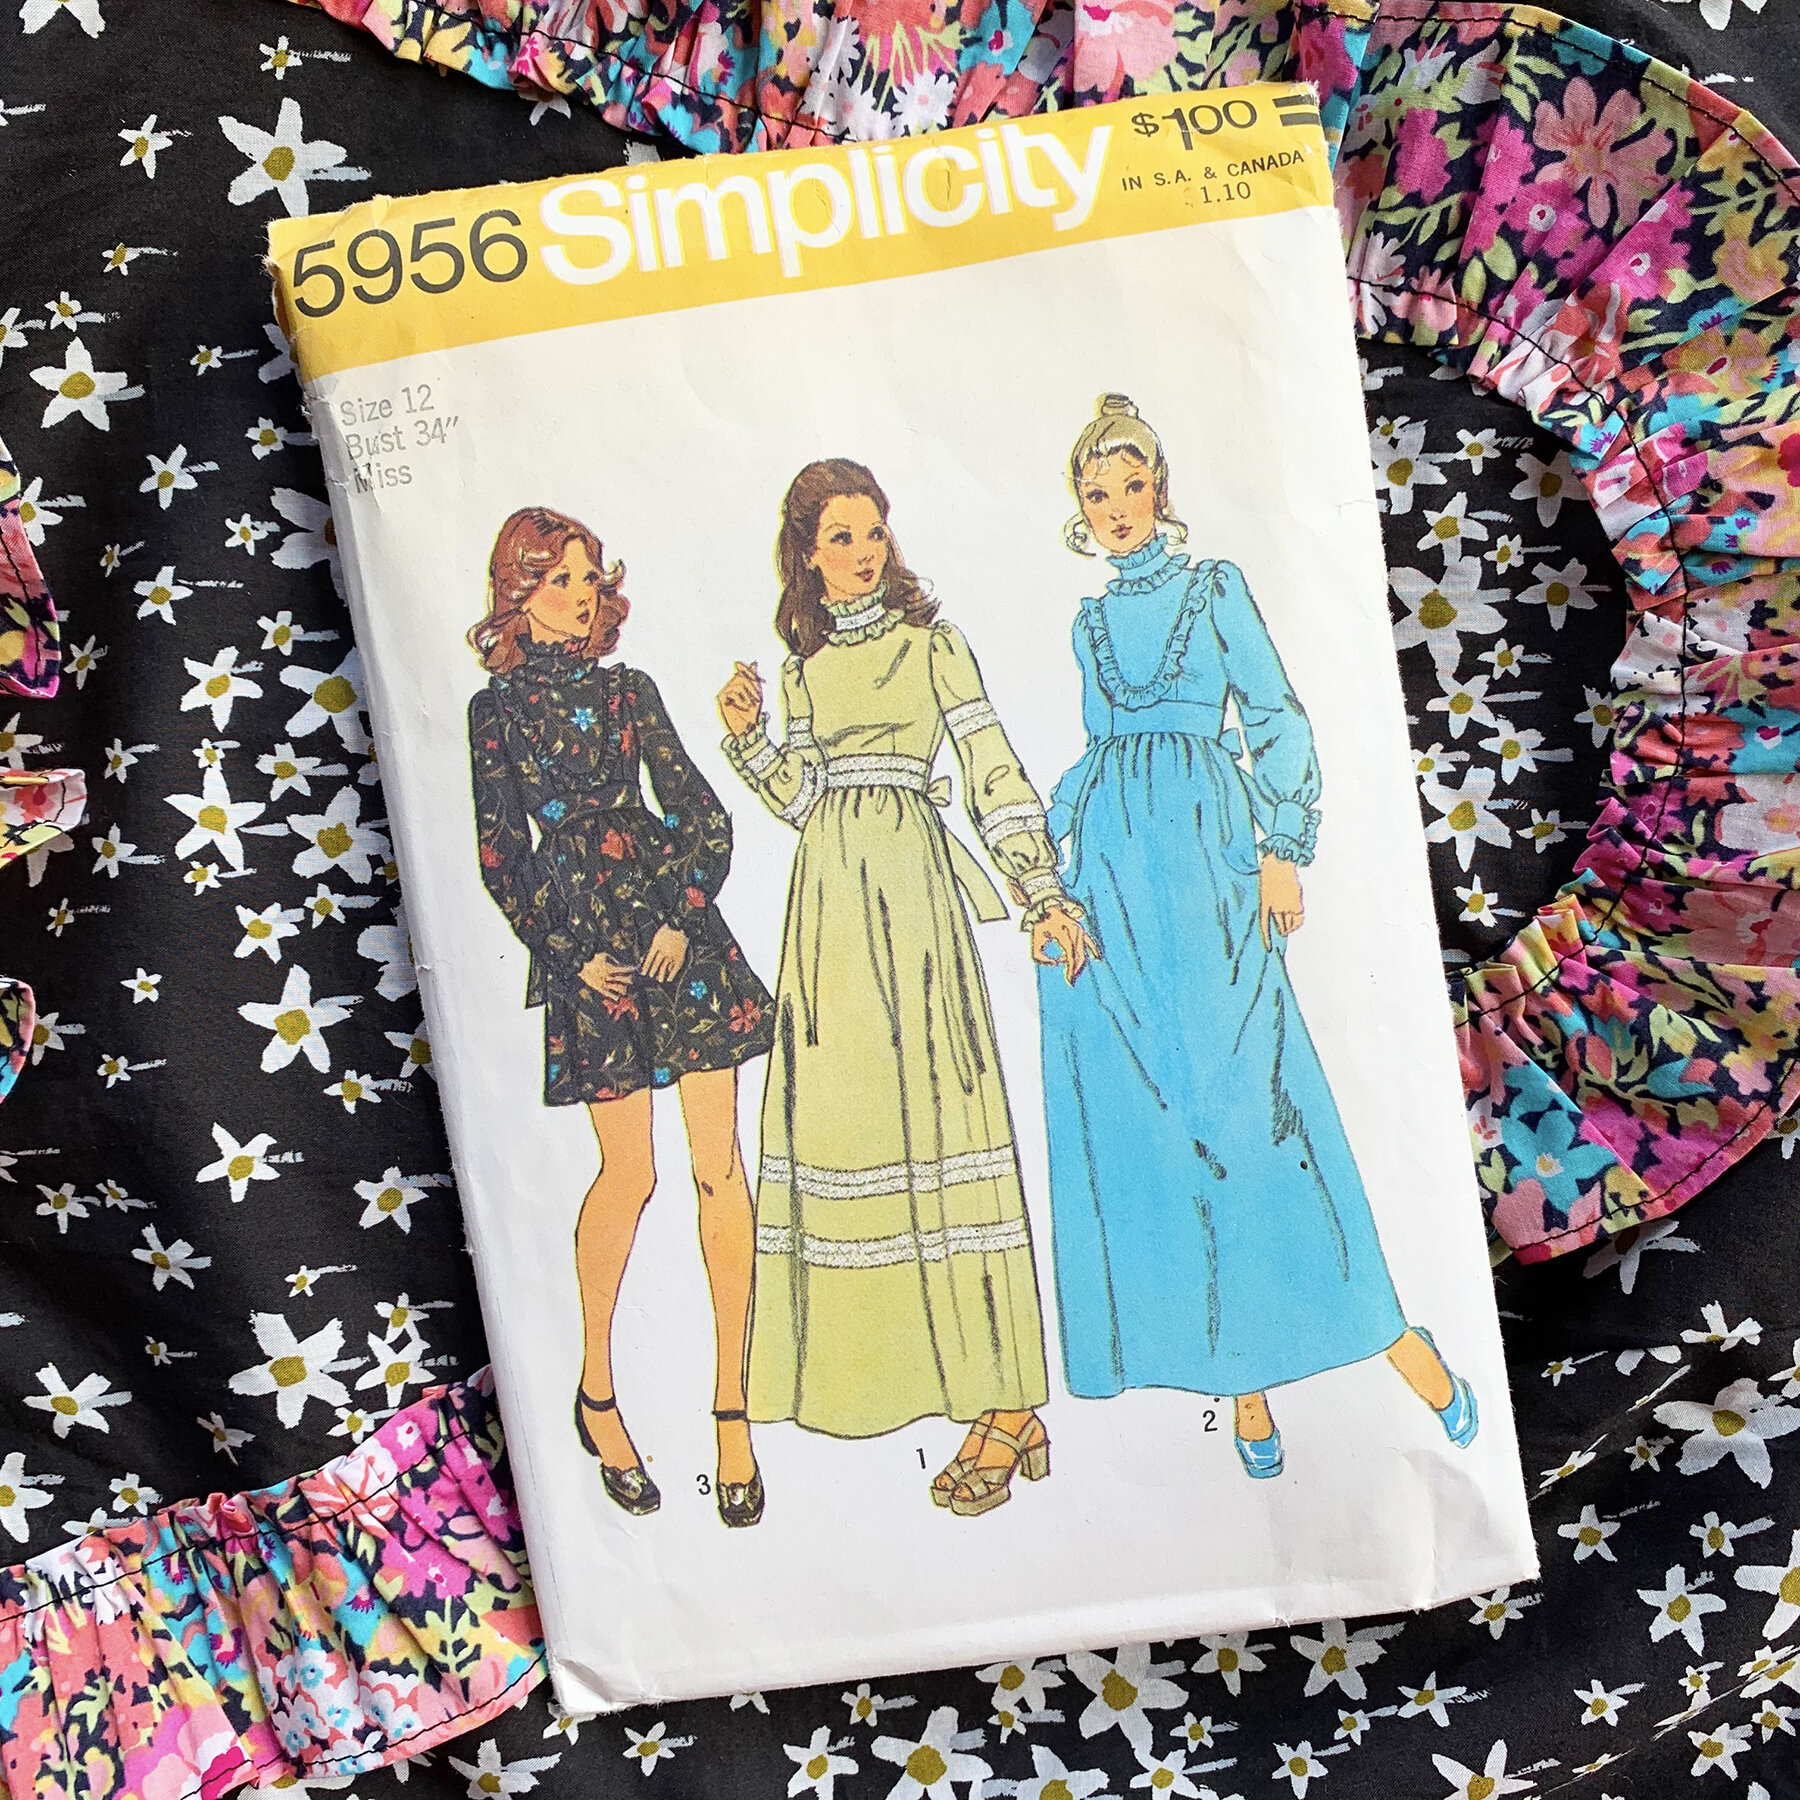 STARRY NIGHT - An Everyday Over The Top Ruffled Dress - Vintage Simplicity  5956 — BURIED DIAMOND